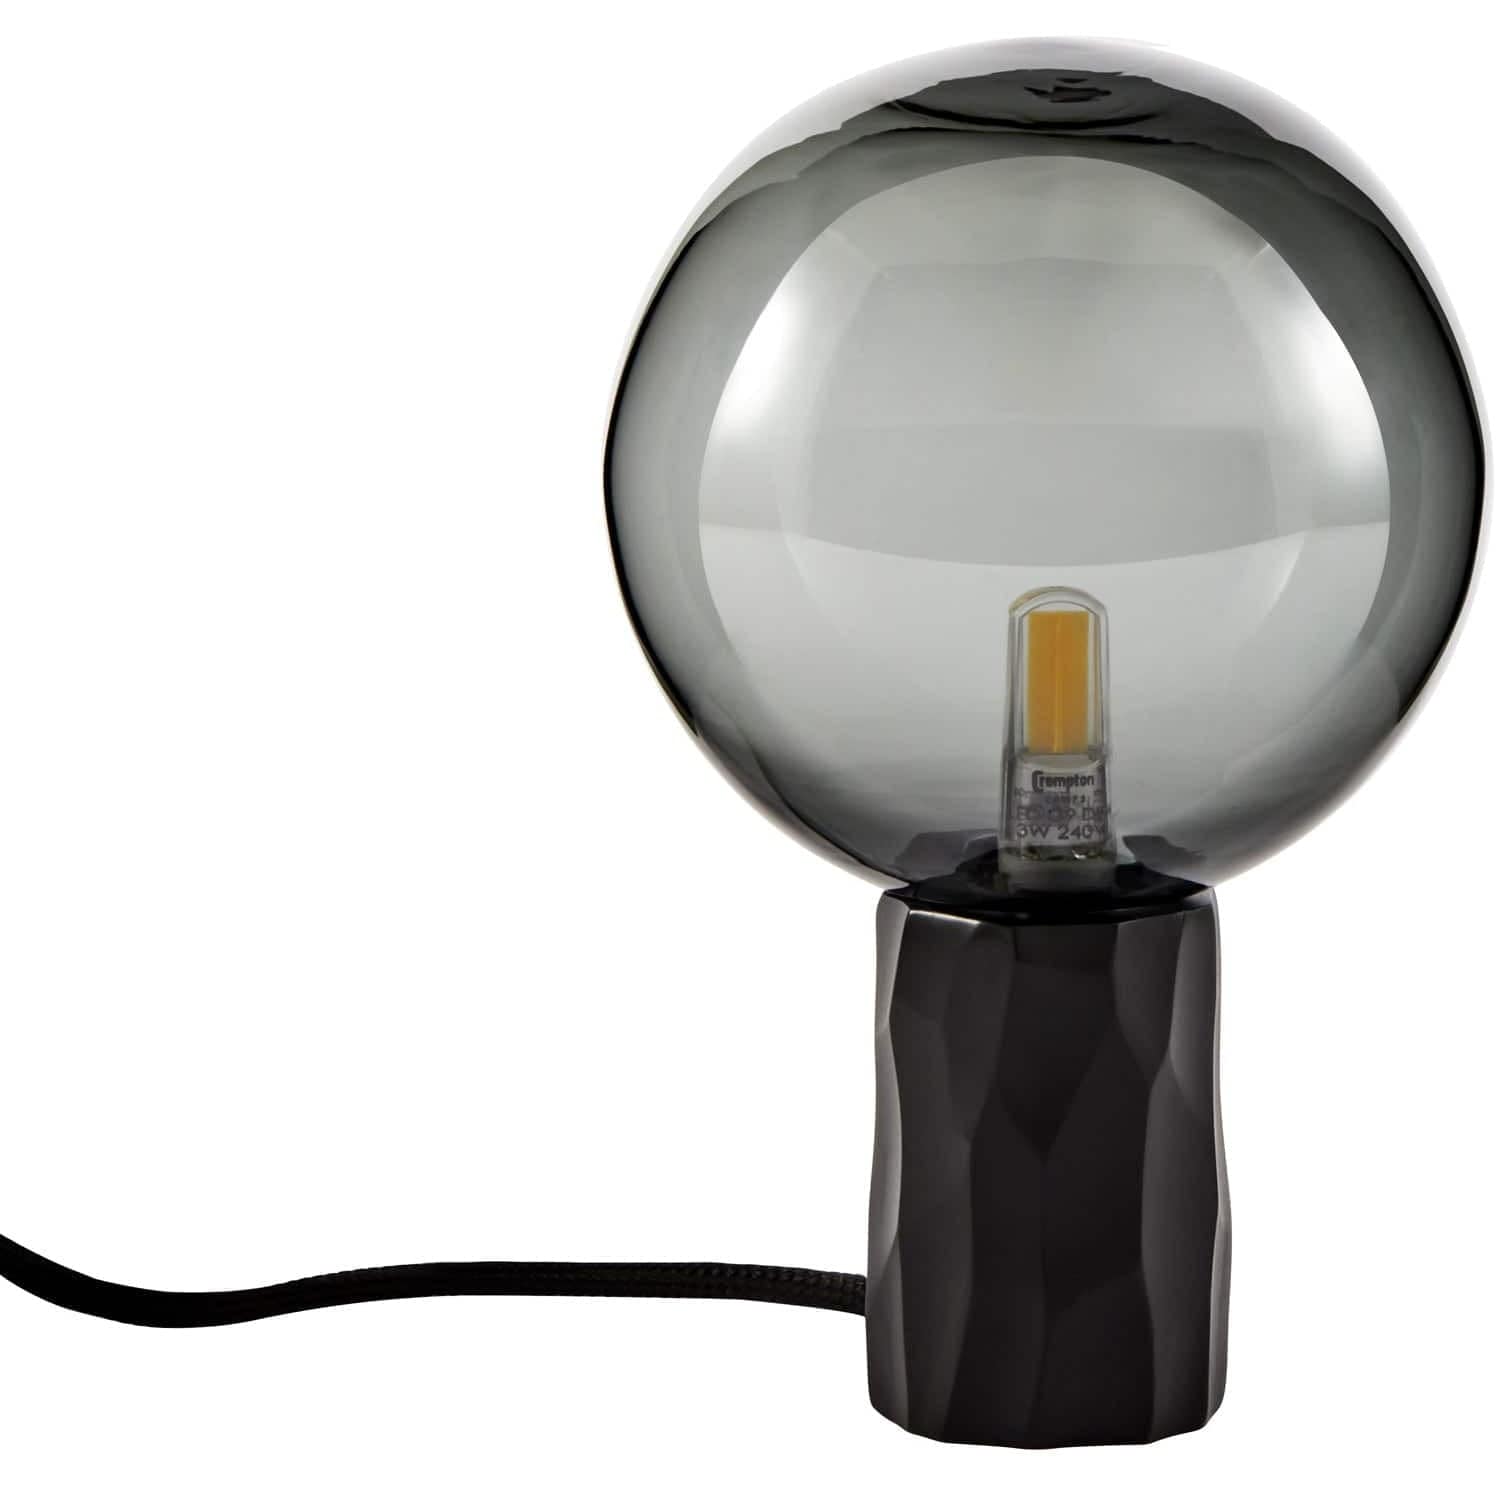 Alex Price Table Lamp Smoked Glass KYOTO Table Lamp Black with White, Smoked or Clear Glass